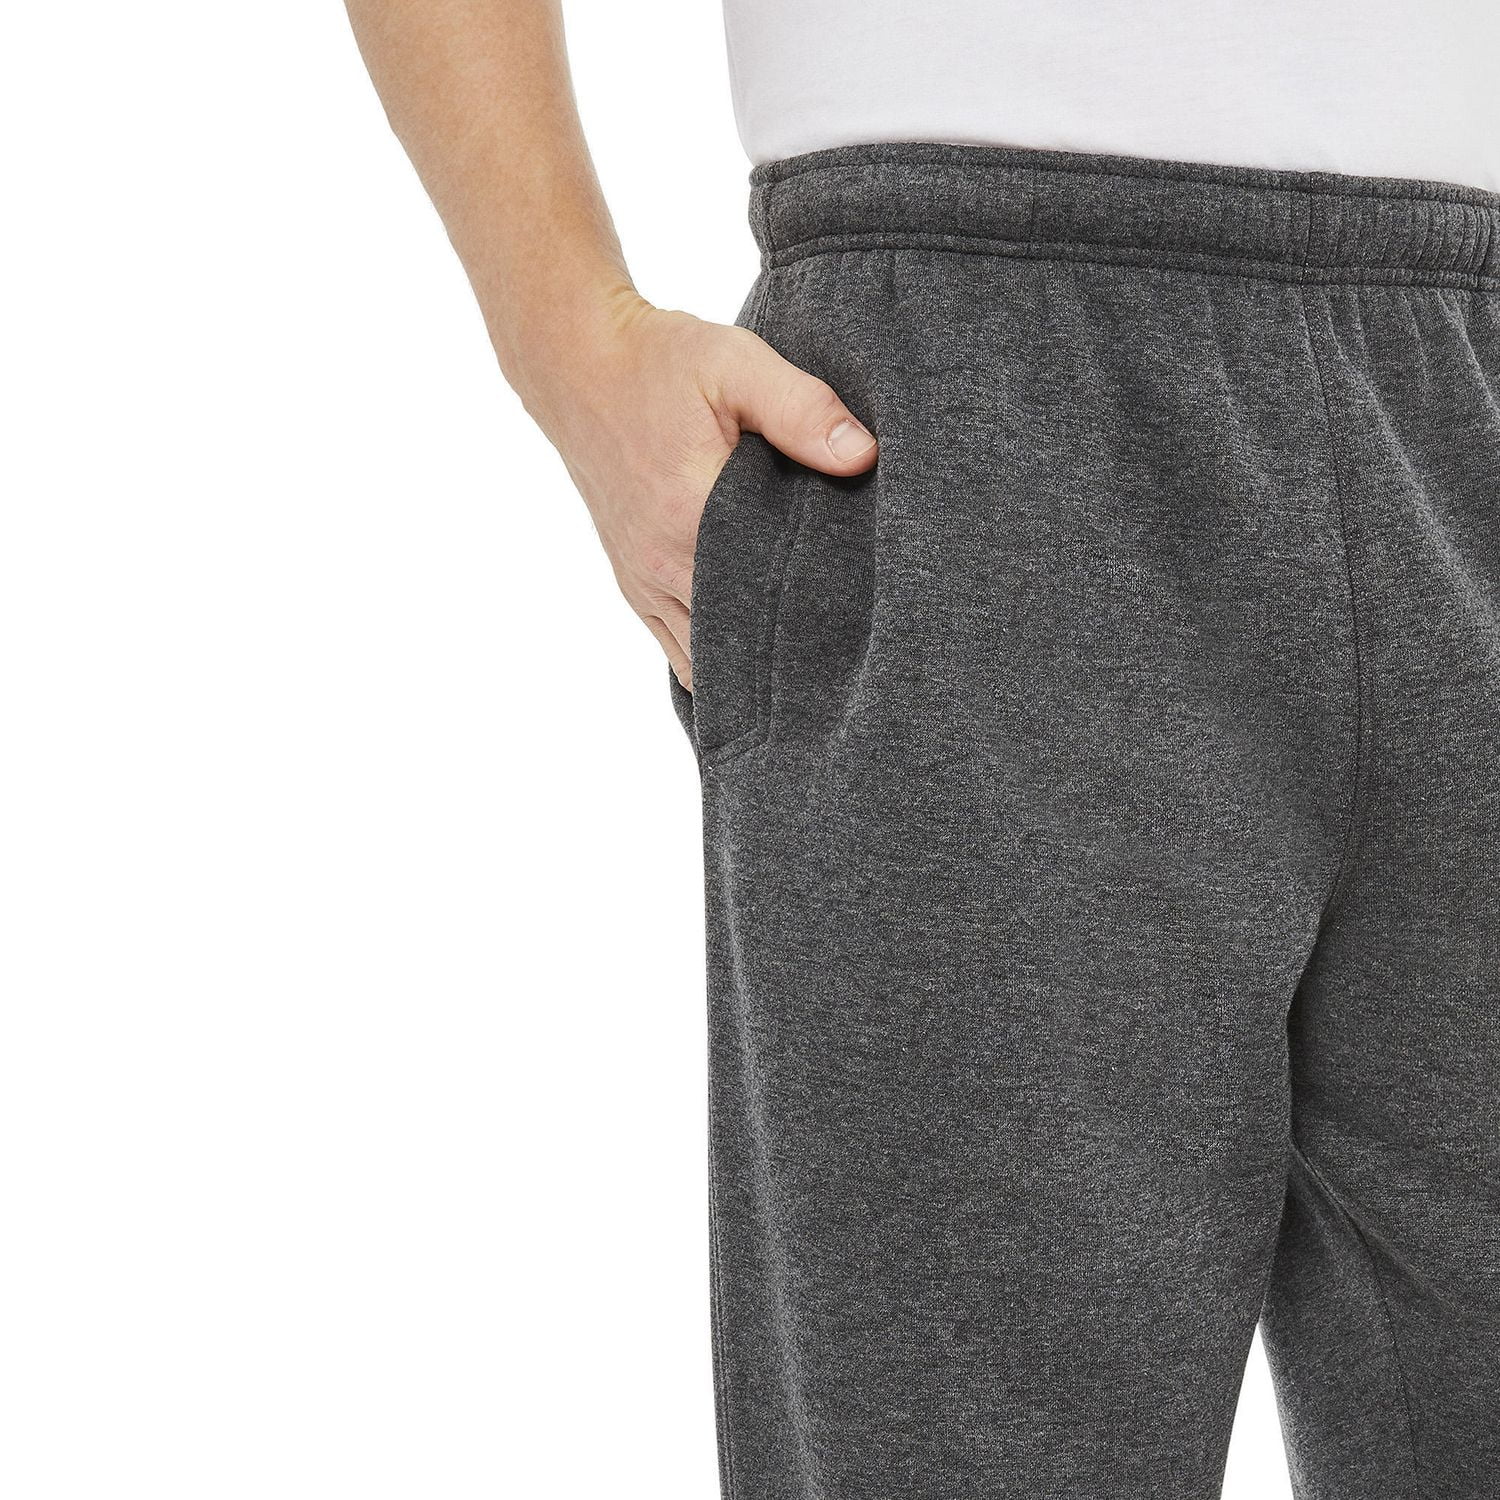 Athletic Works Gray Sweatpants Size 16 - 18 - 15% off